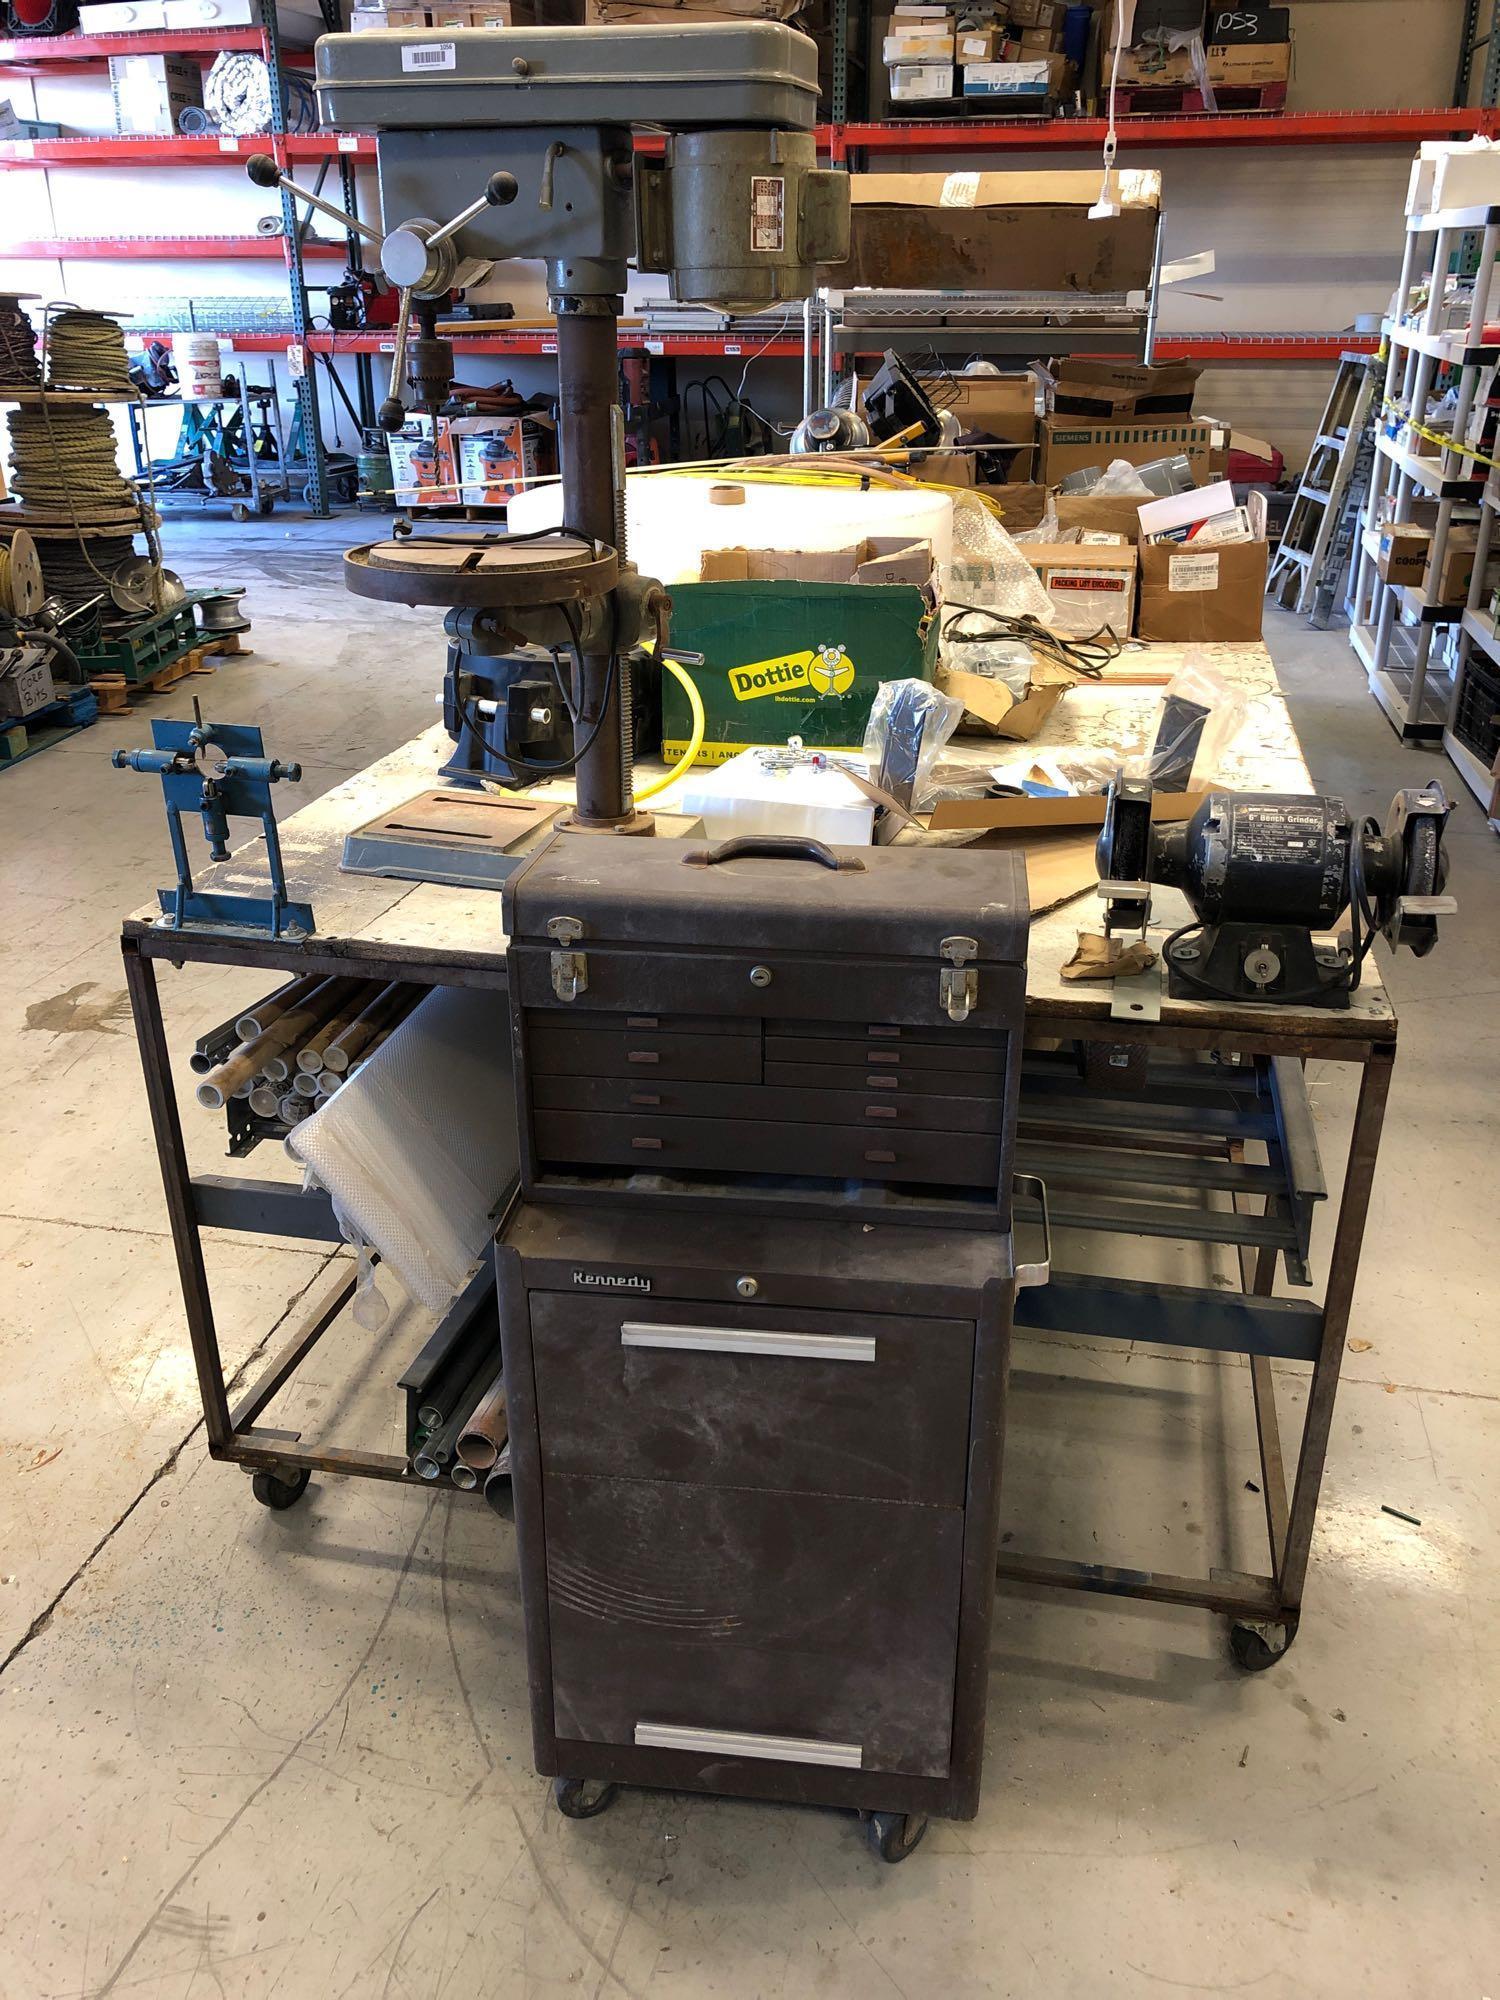 Work Bench, Shelves, Tool Box, Contents